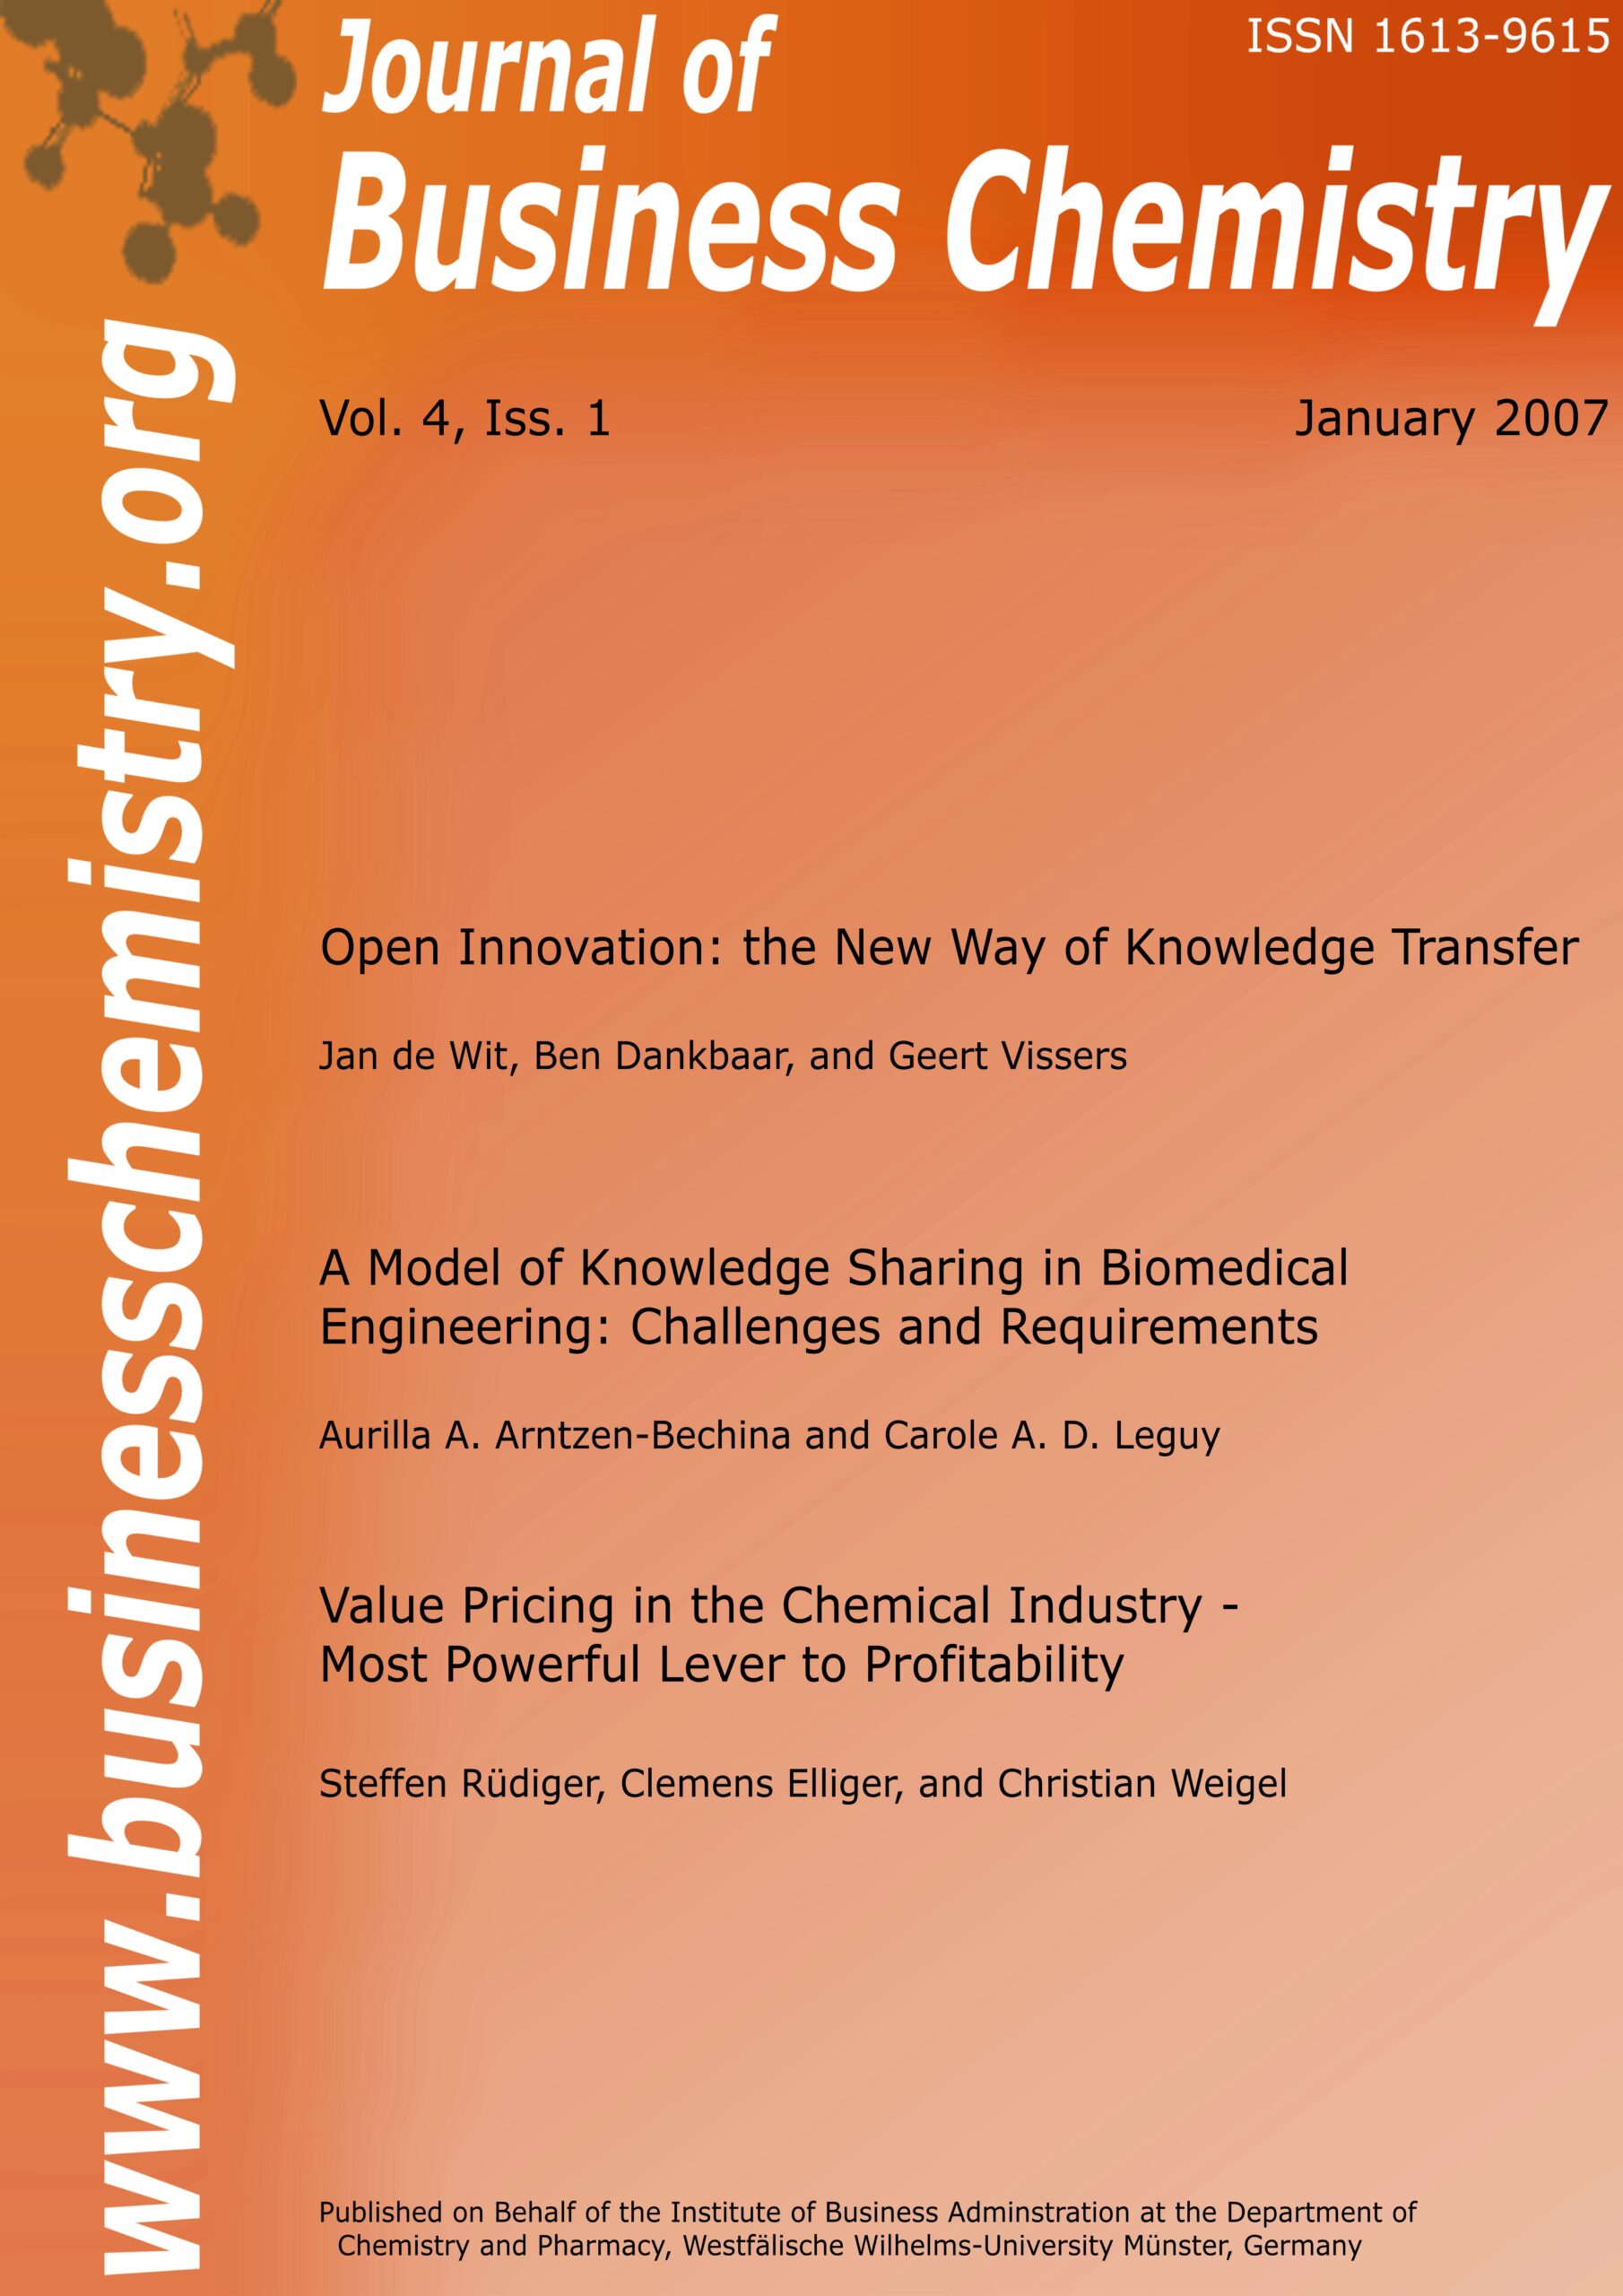 Journal of Business Chemistry January 2007